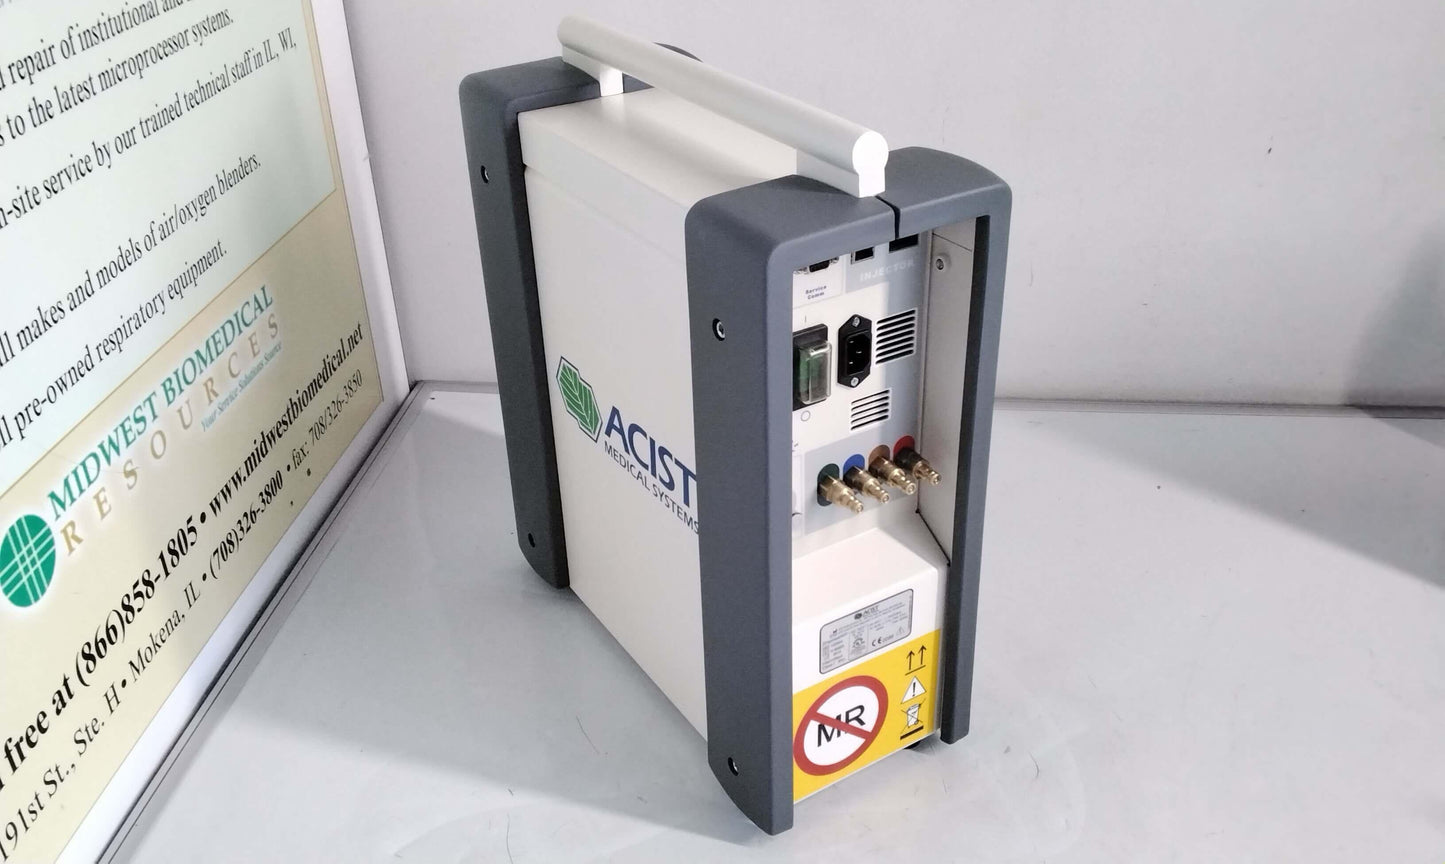 NEW Open Box ACIST Medical Systems EmpowerMR Hydraulic Controller 102904 with Free Shipping and Warranty - MBR Medicals